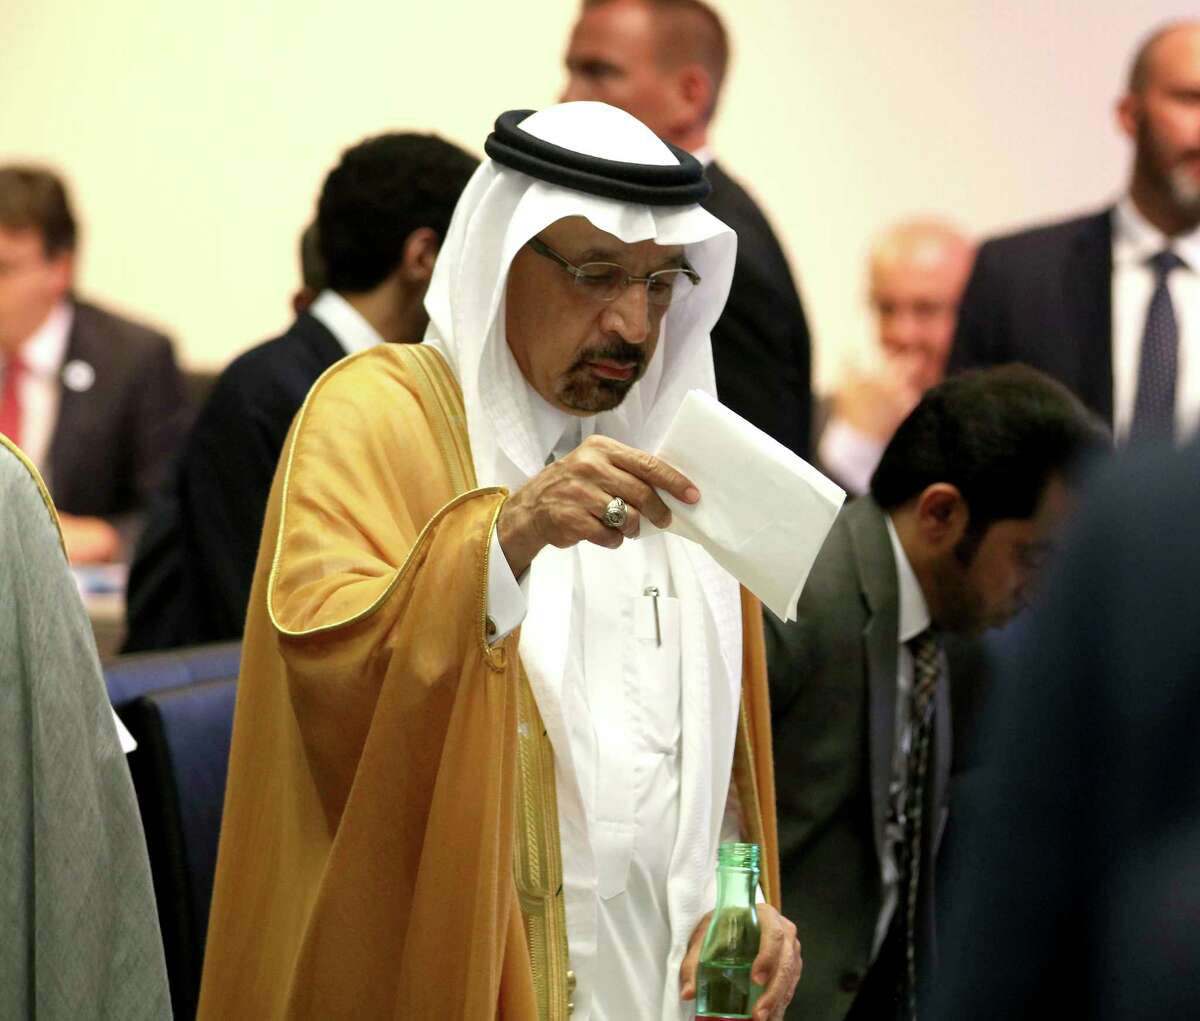 Khalid Al-Falih, Minister of Energy, Industry and Mineral Resources of Saudi Arabia stands prior to the start of a meeting the Organization of the Petroleum Exporting Countries, OPEC, at their headquarters in Vienna, Austria, Monday, July 1, 2019.